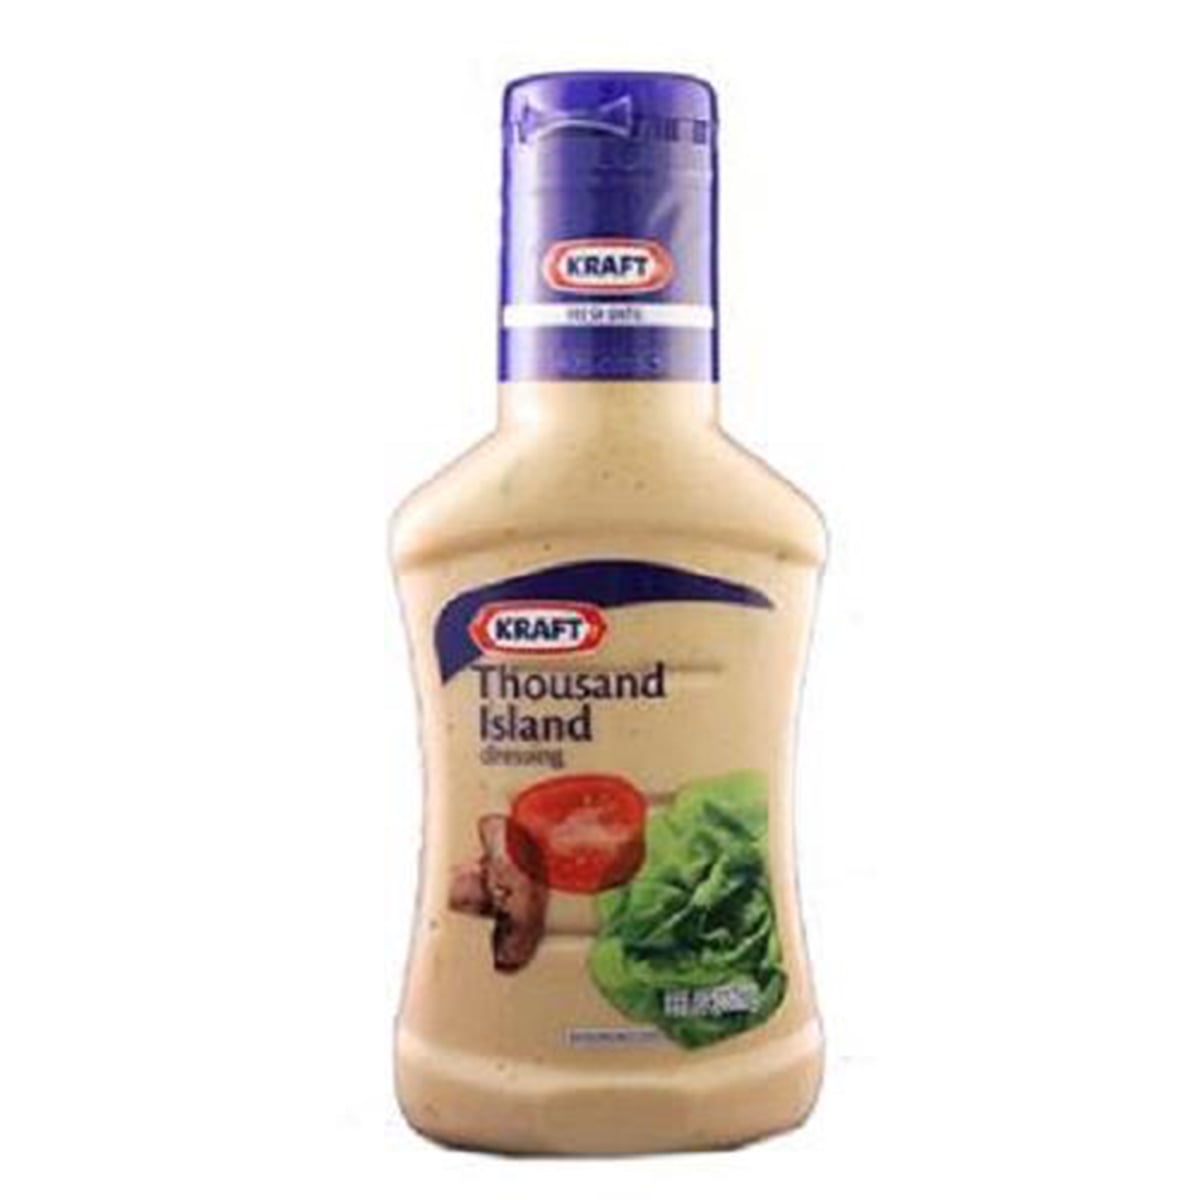 Product Of Kraft, Thousand Island Dressing, Count 1 - Dressing ...